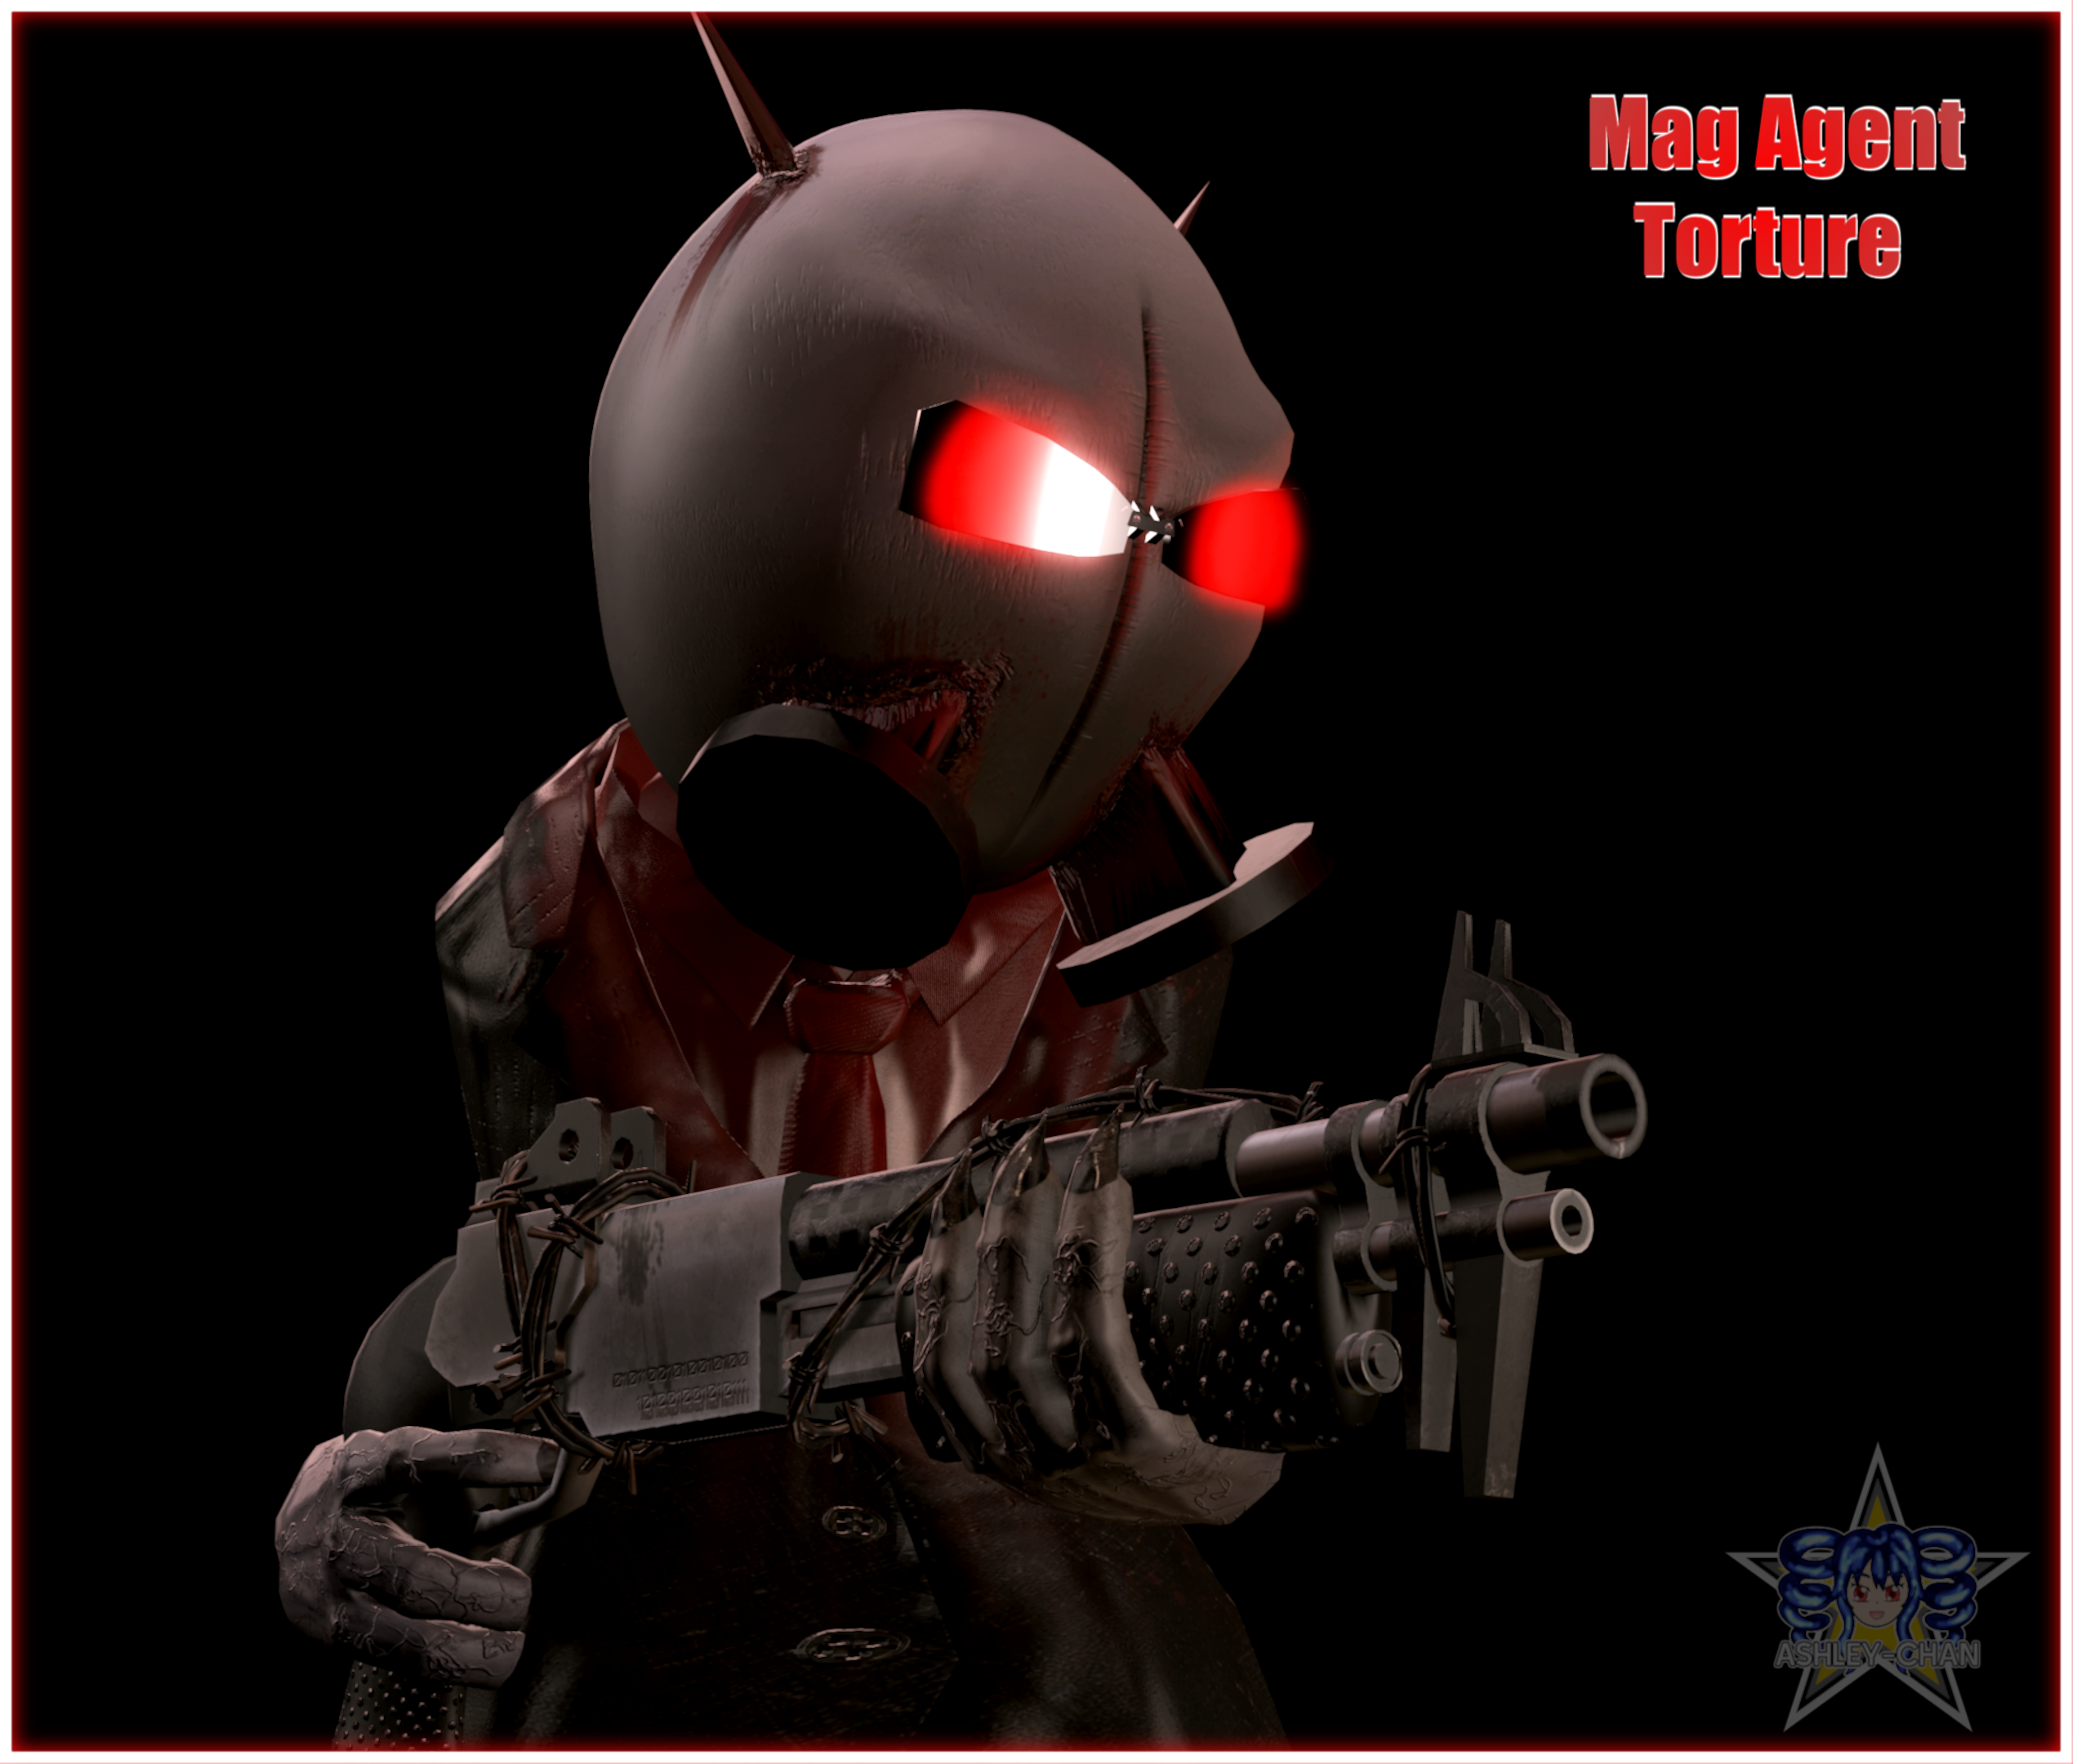 Agent madness accelerant HD by Allstarzombie55 on DeviantArt